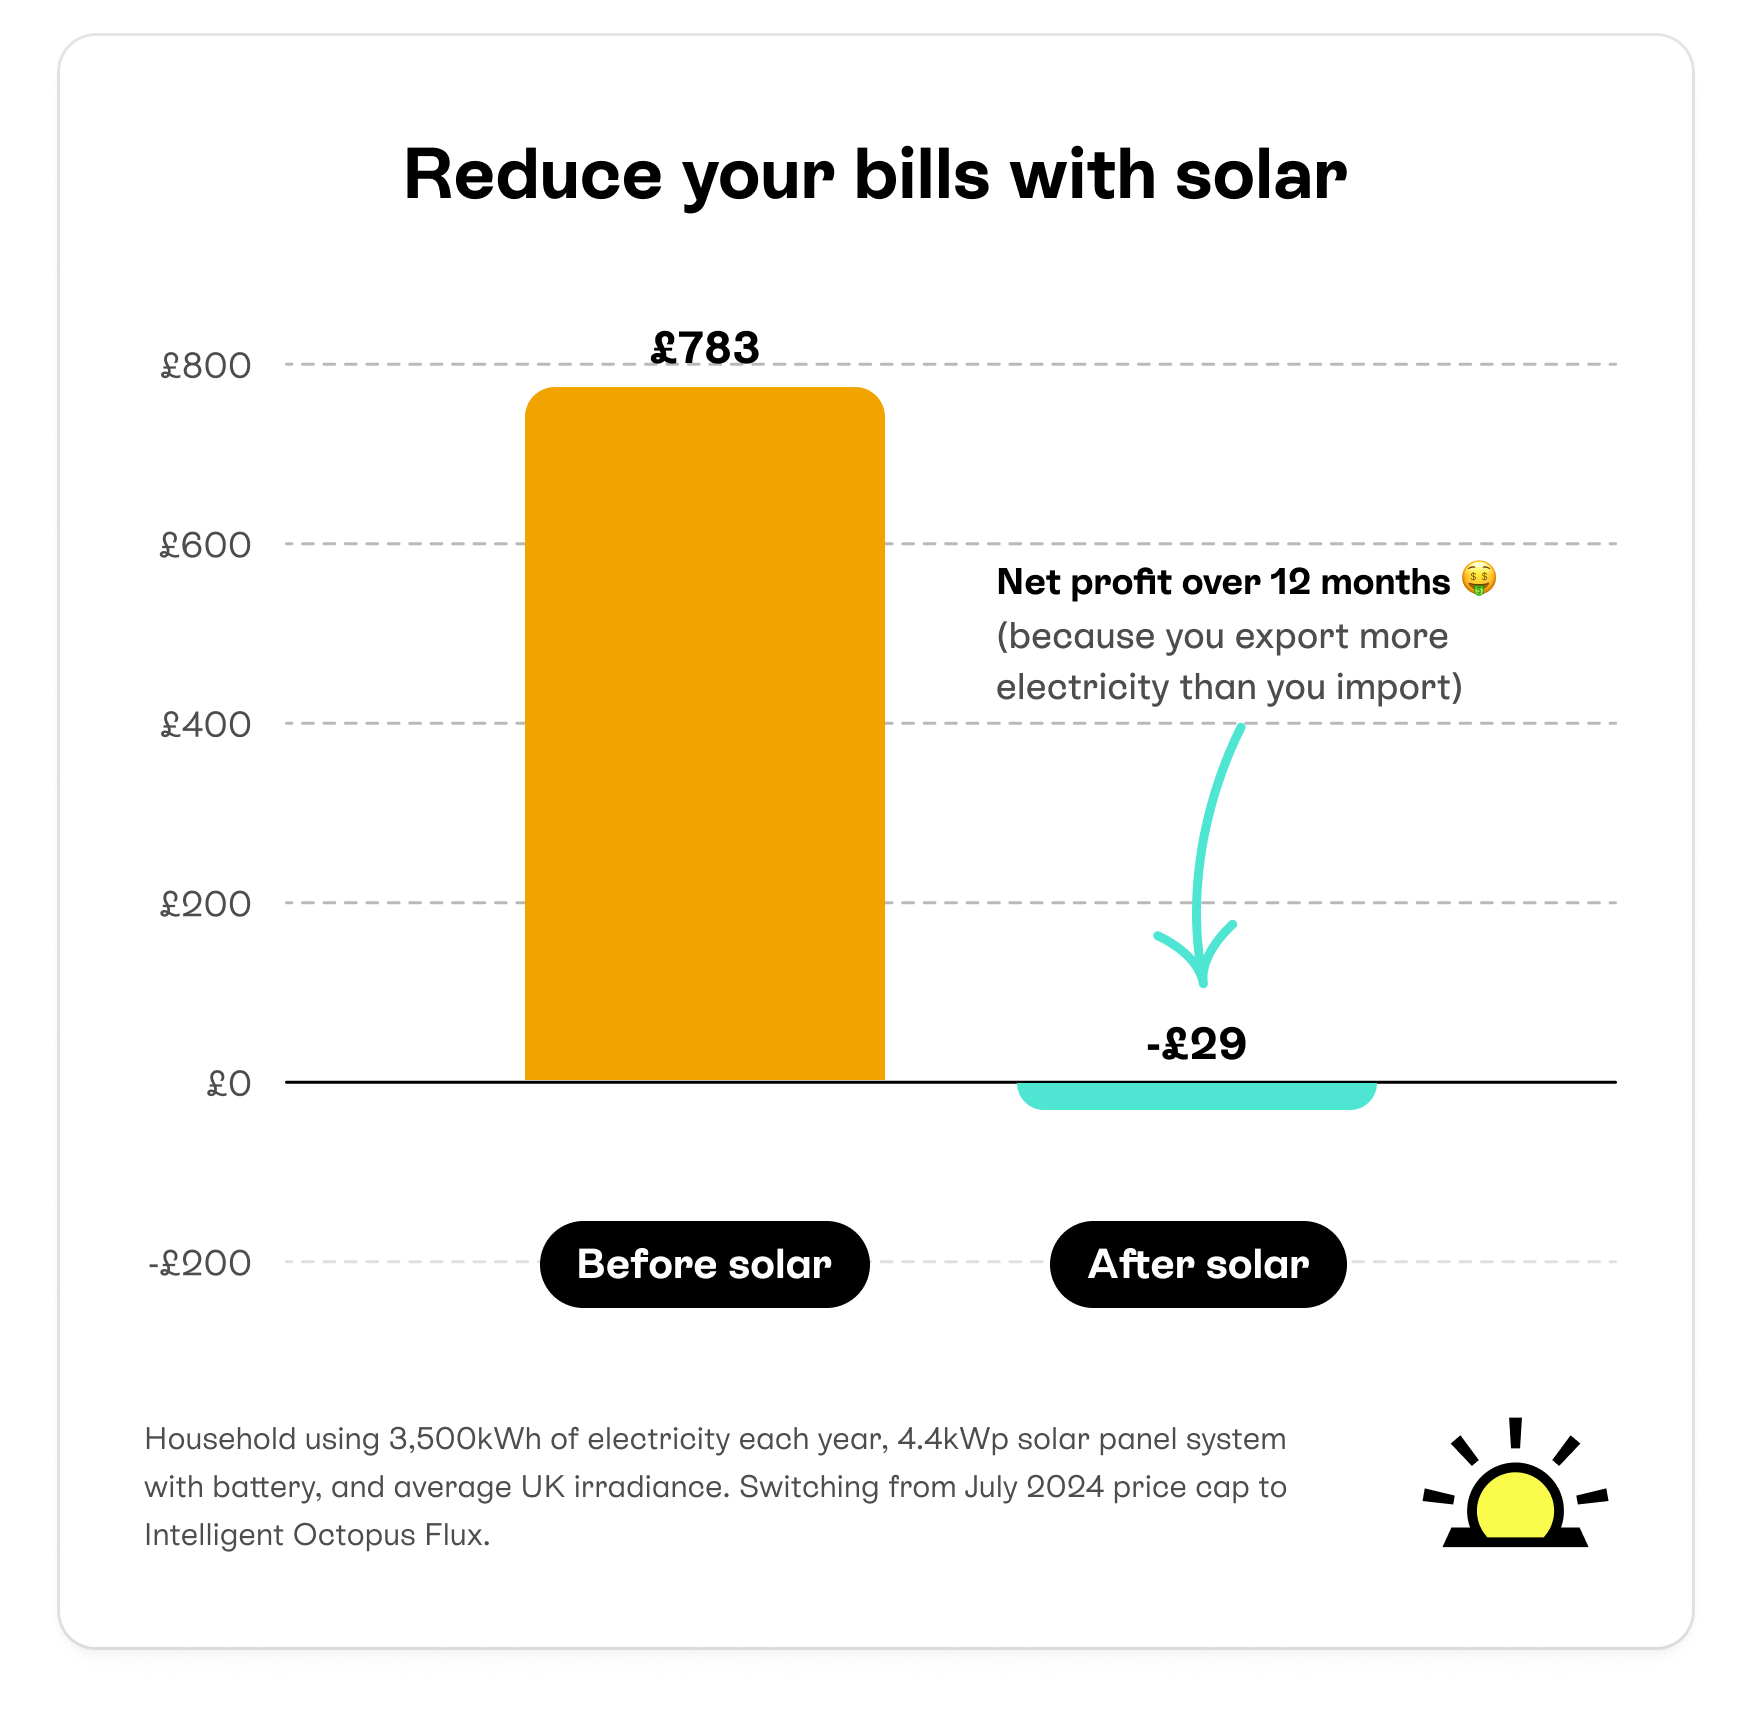 Bar chart showing vast reduction in energy bill savings after someone switches to solar (£783 falling to -£29)